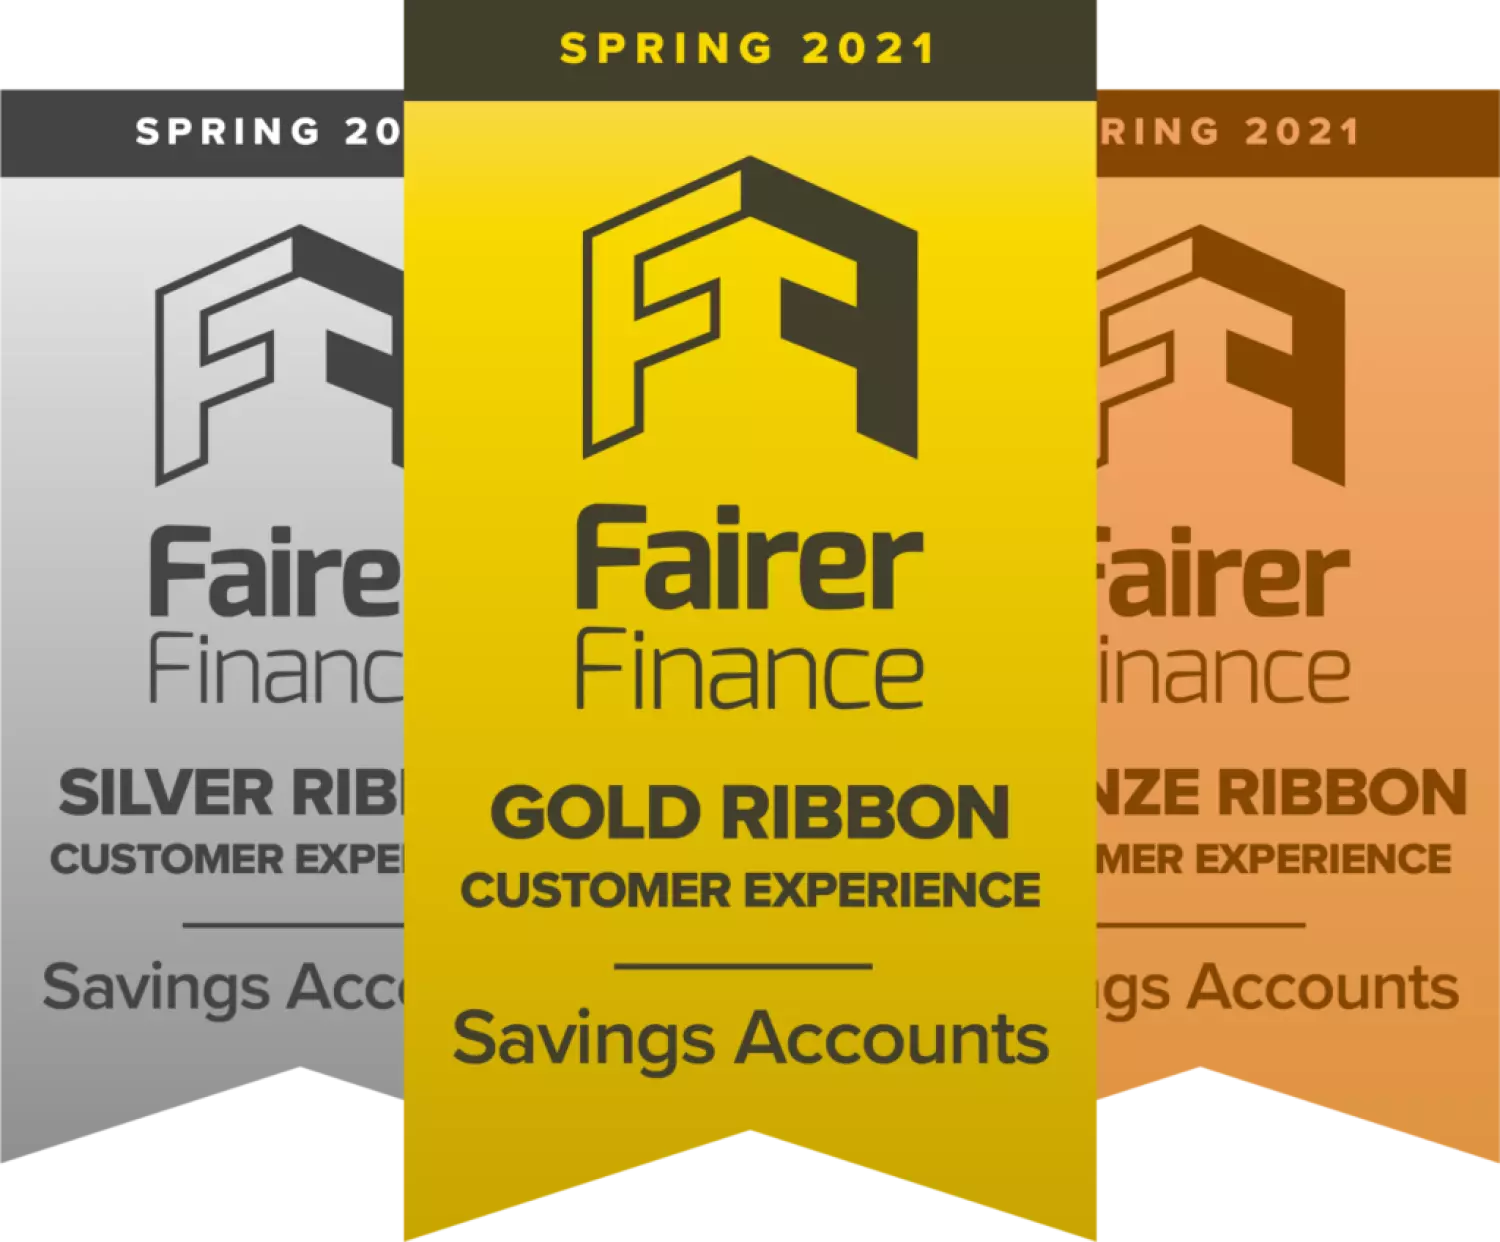 Fairer Finance customer experience ribbons